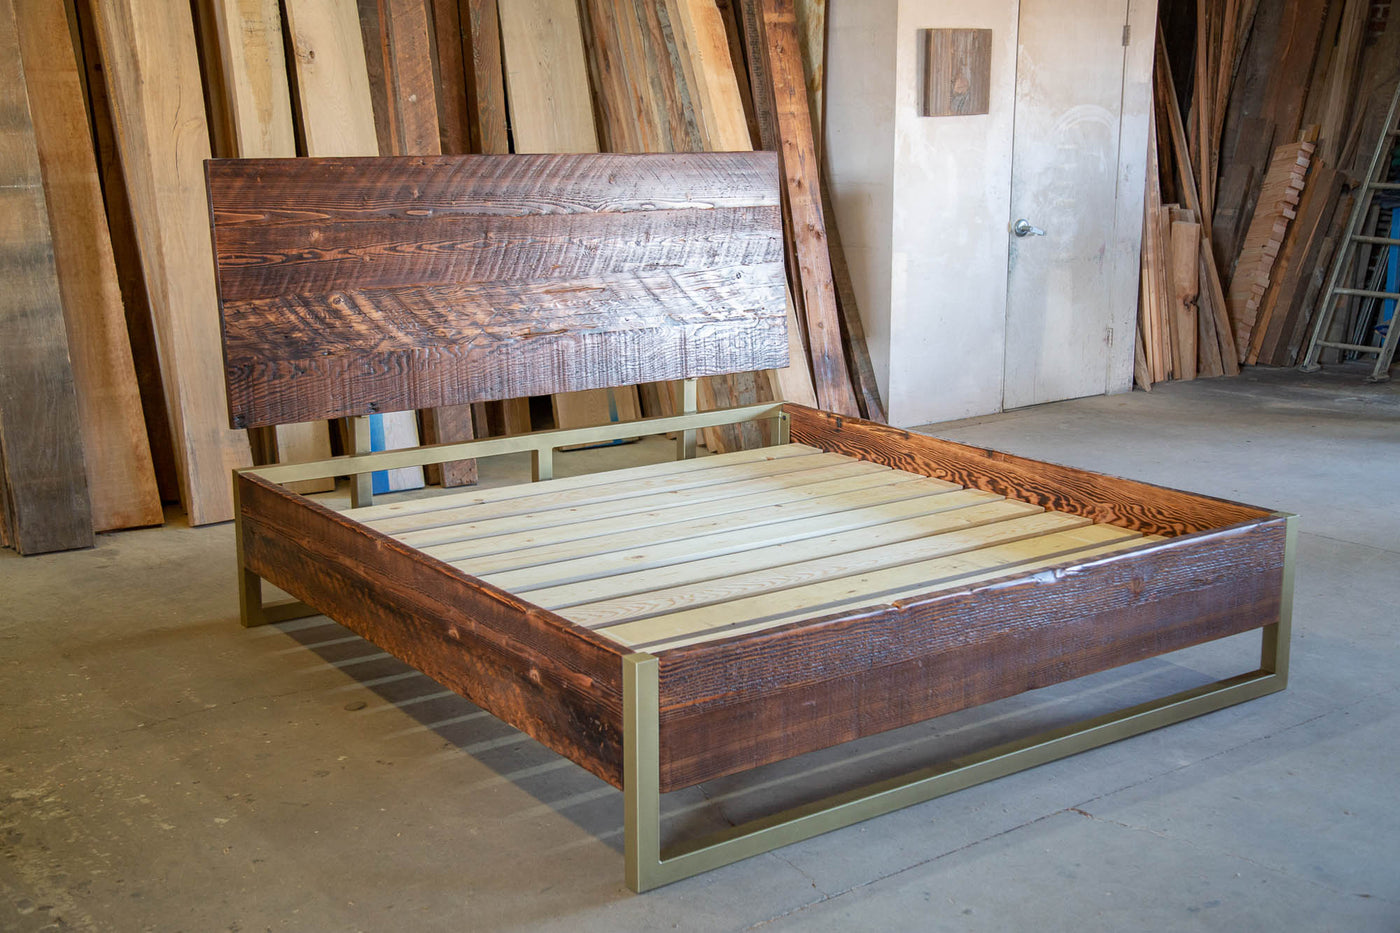 All-wood bed frame and headboard